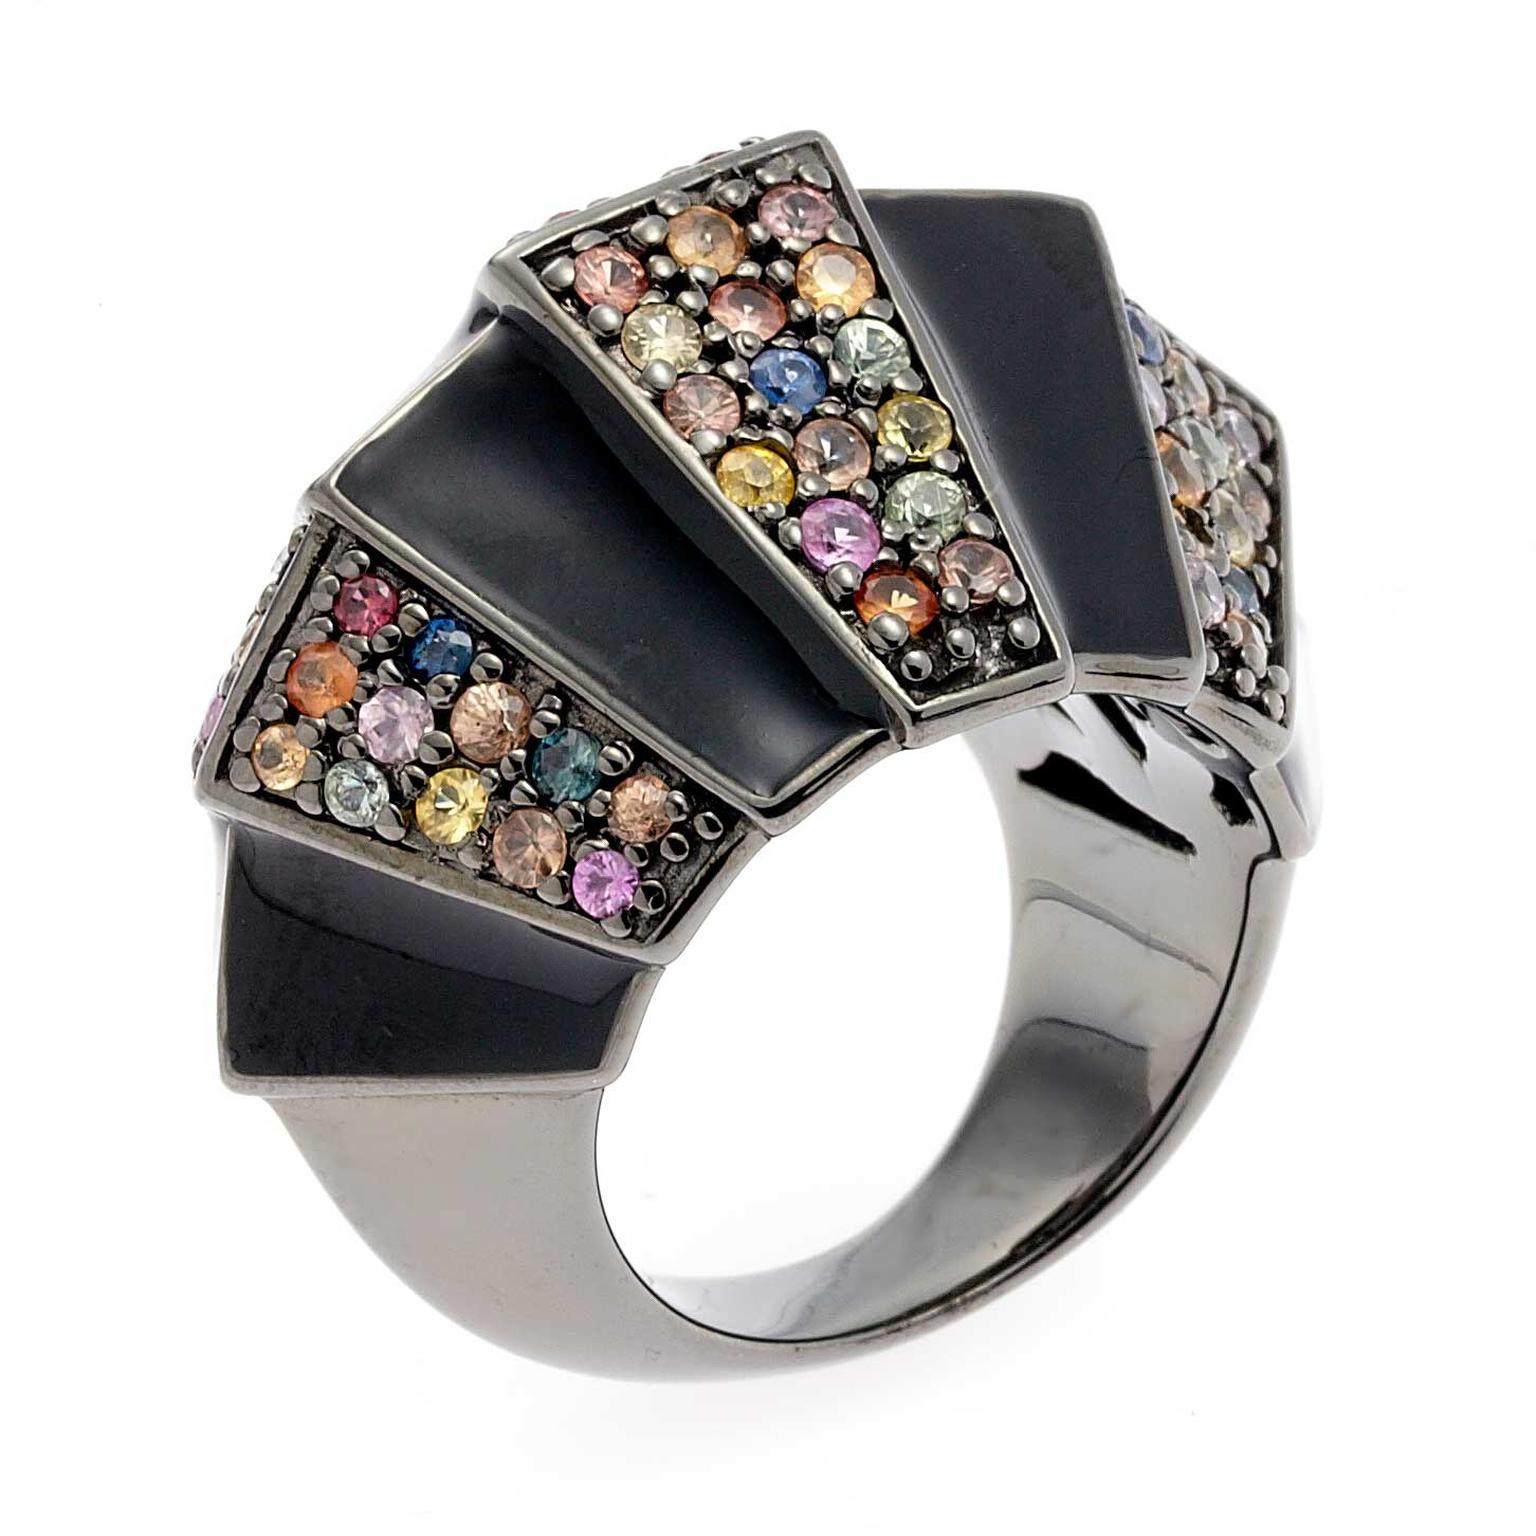 Matthew Campbell Laurenza Primordial silver ring in black enamel with sapphires in black rhodium